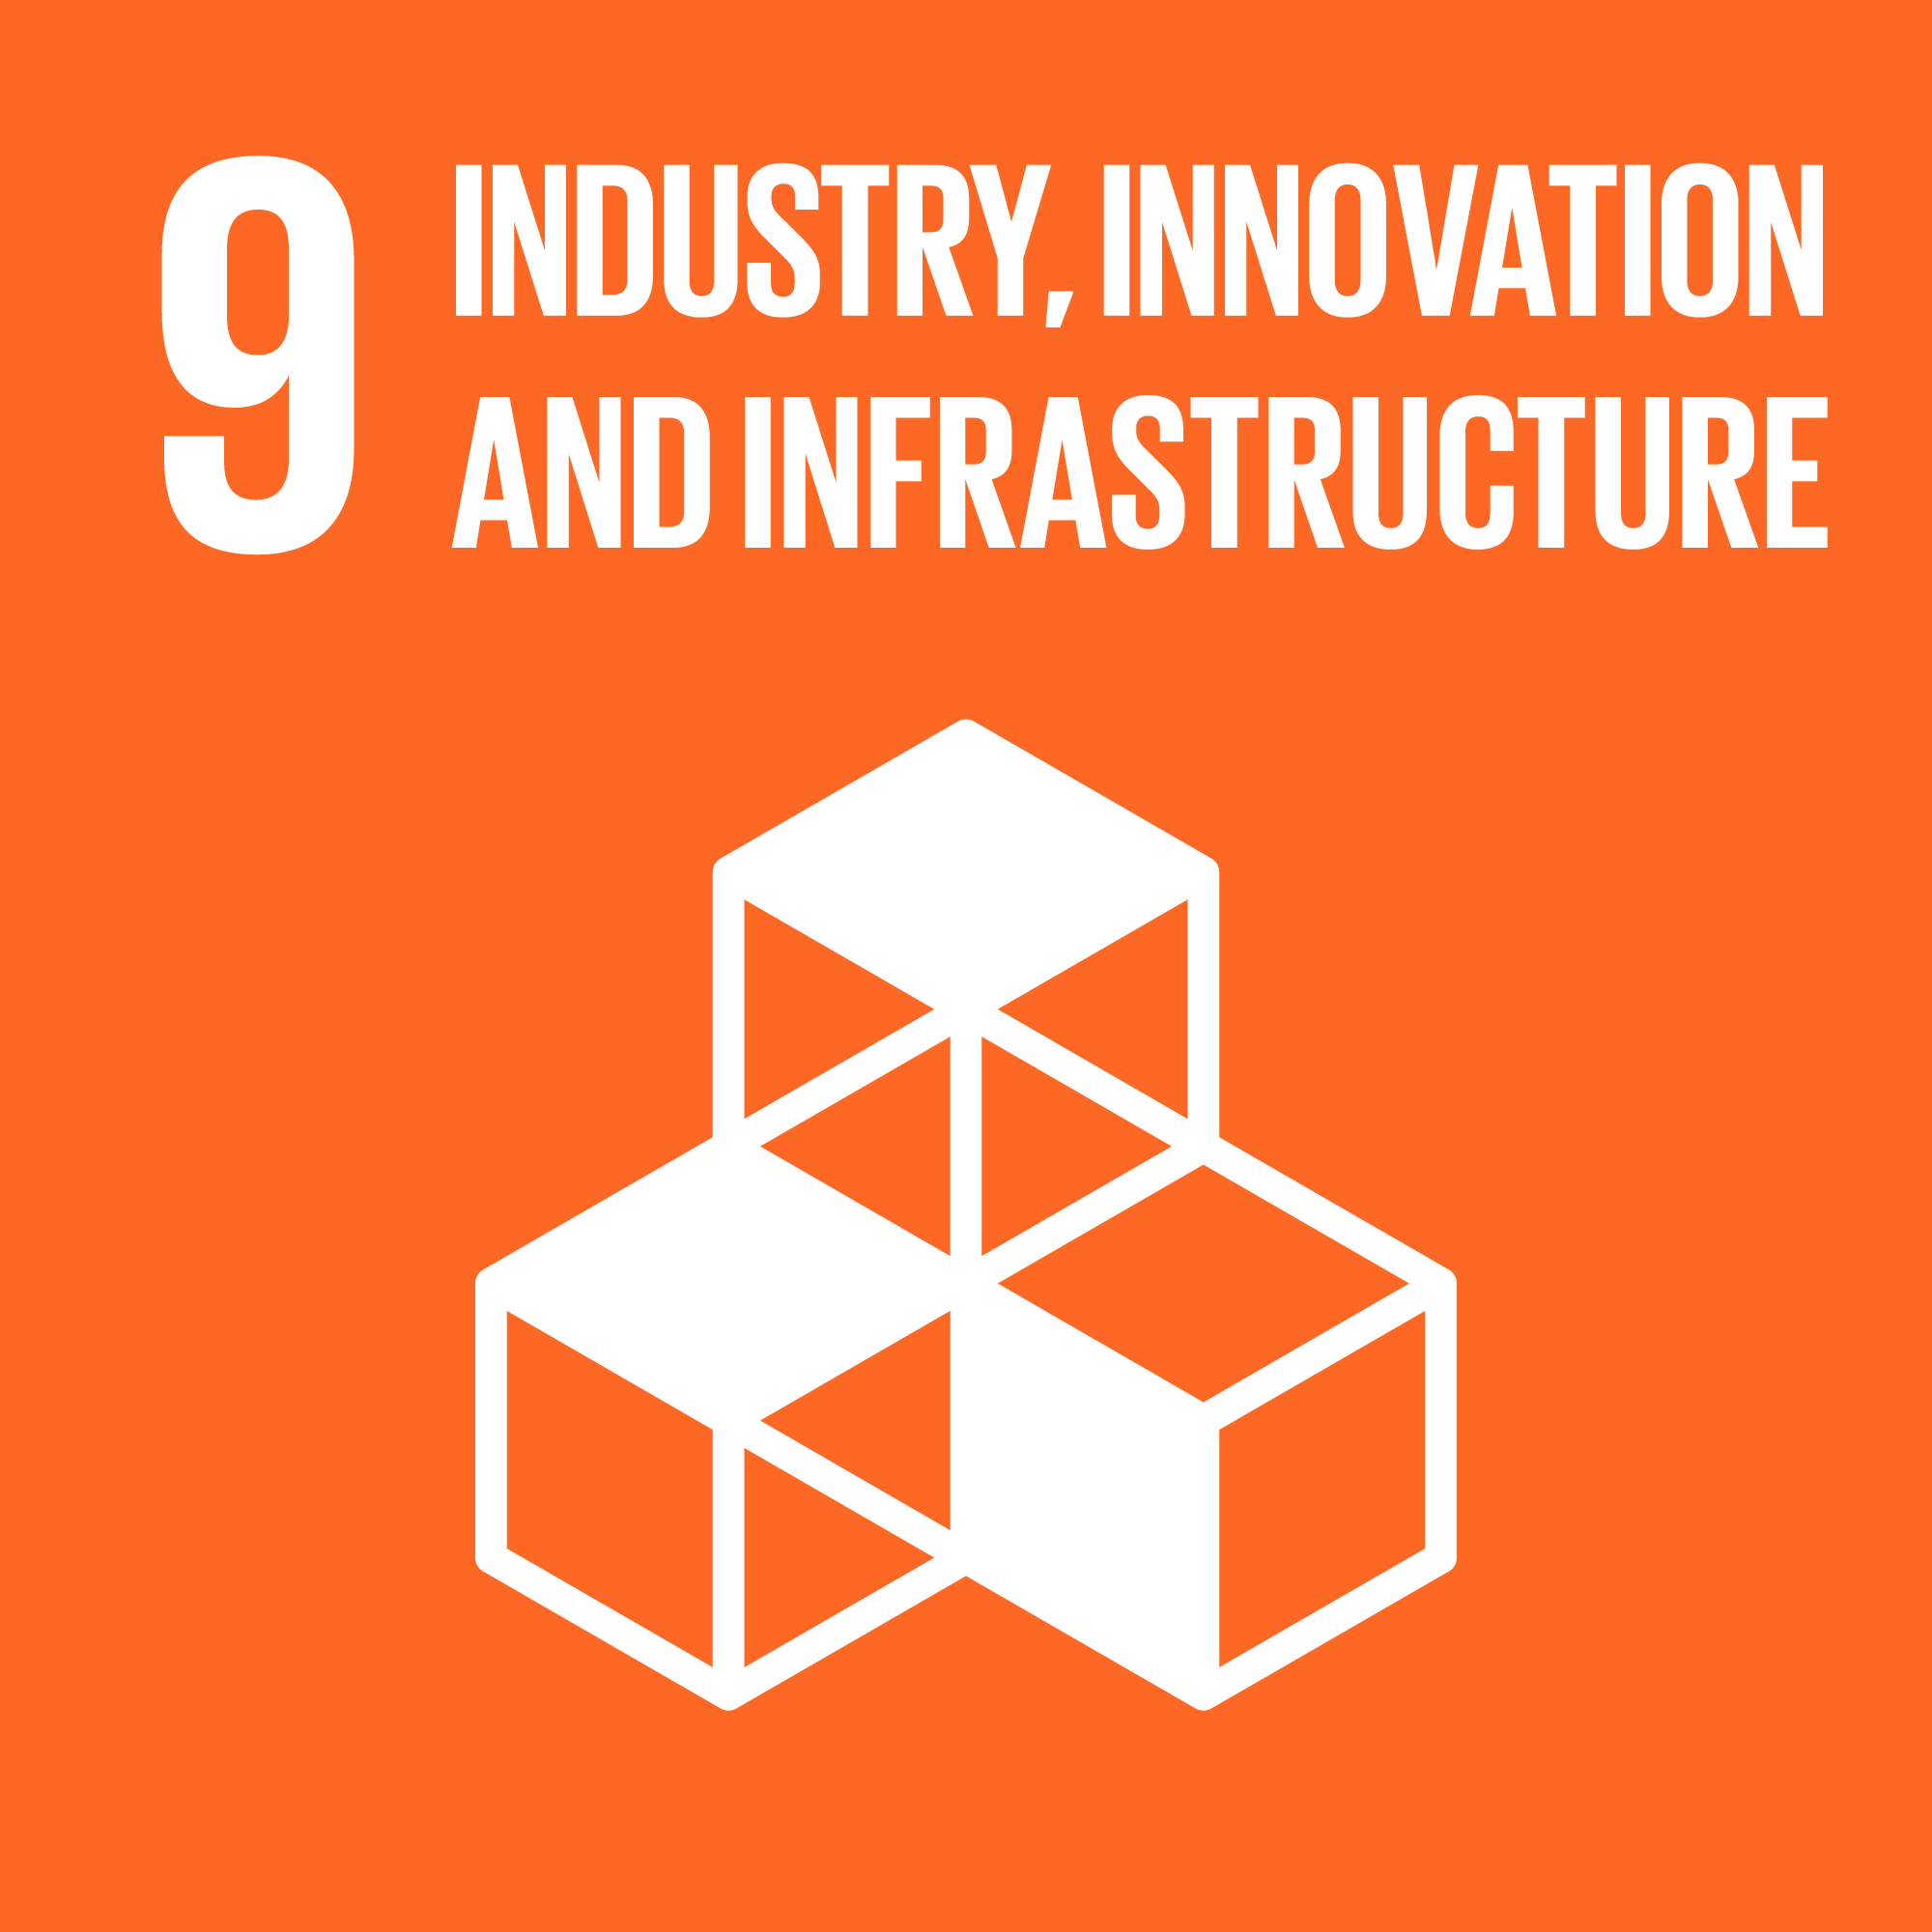 Sustainable Development Goal 9: Innovation, Industry and Infrastructure